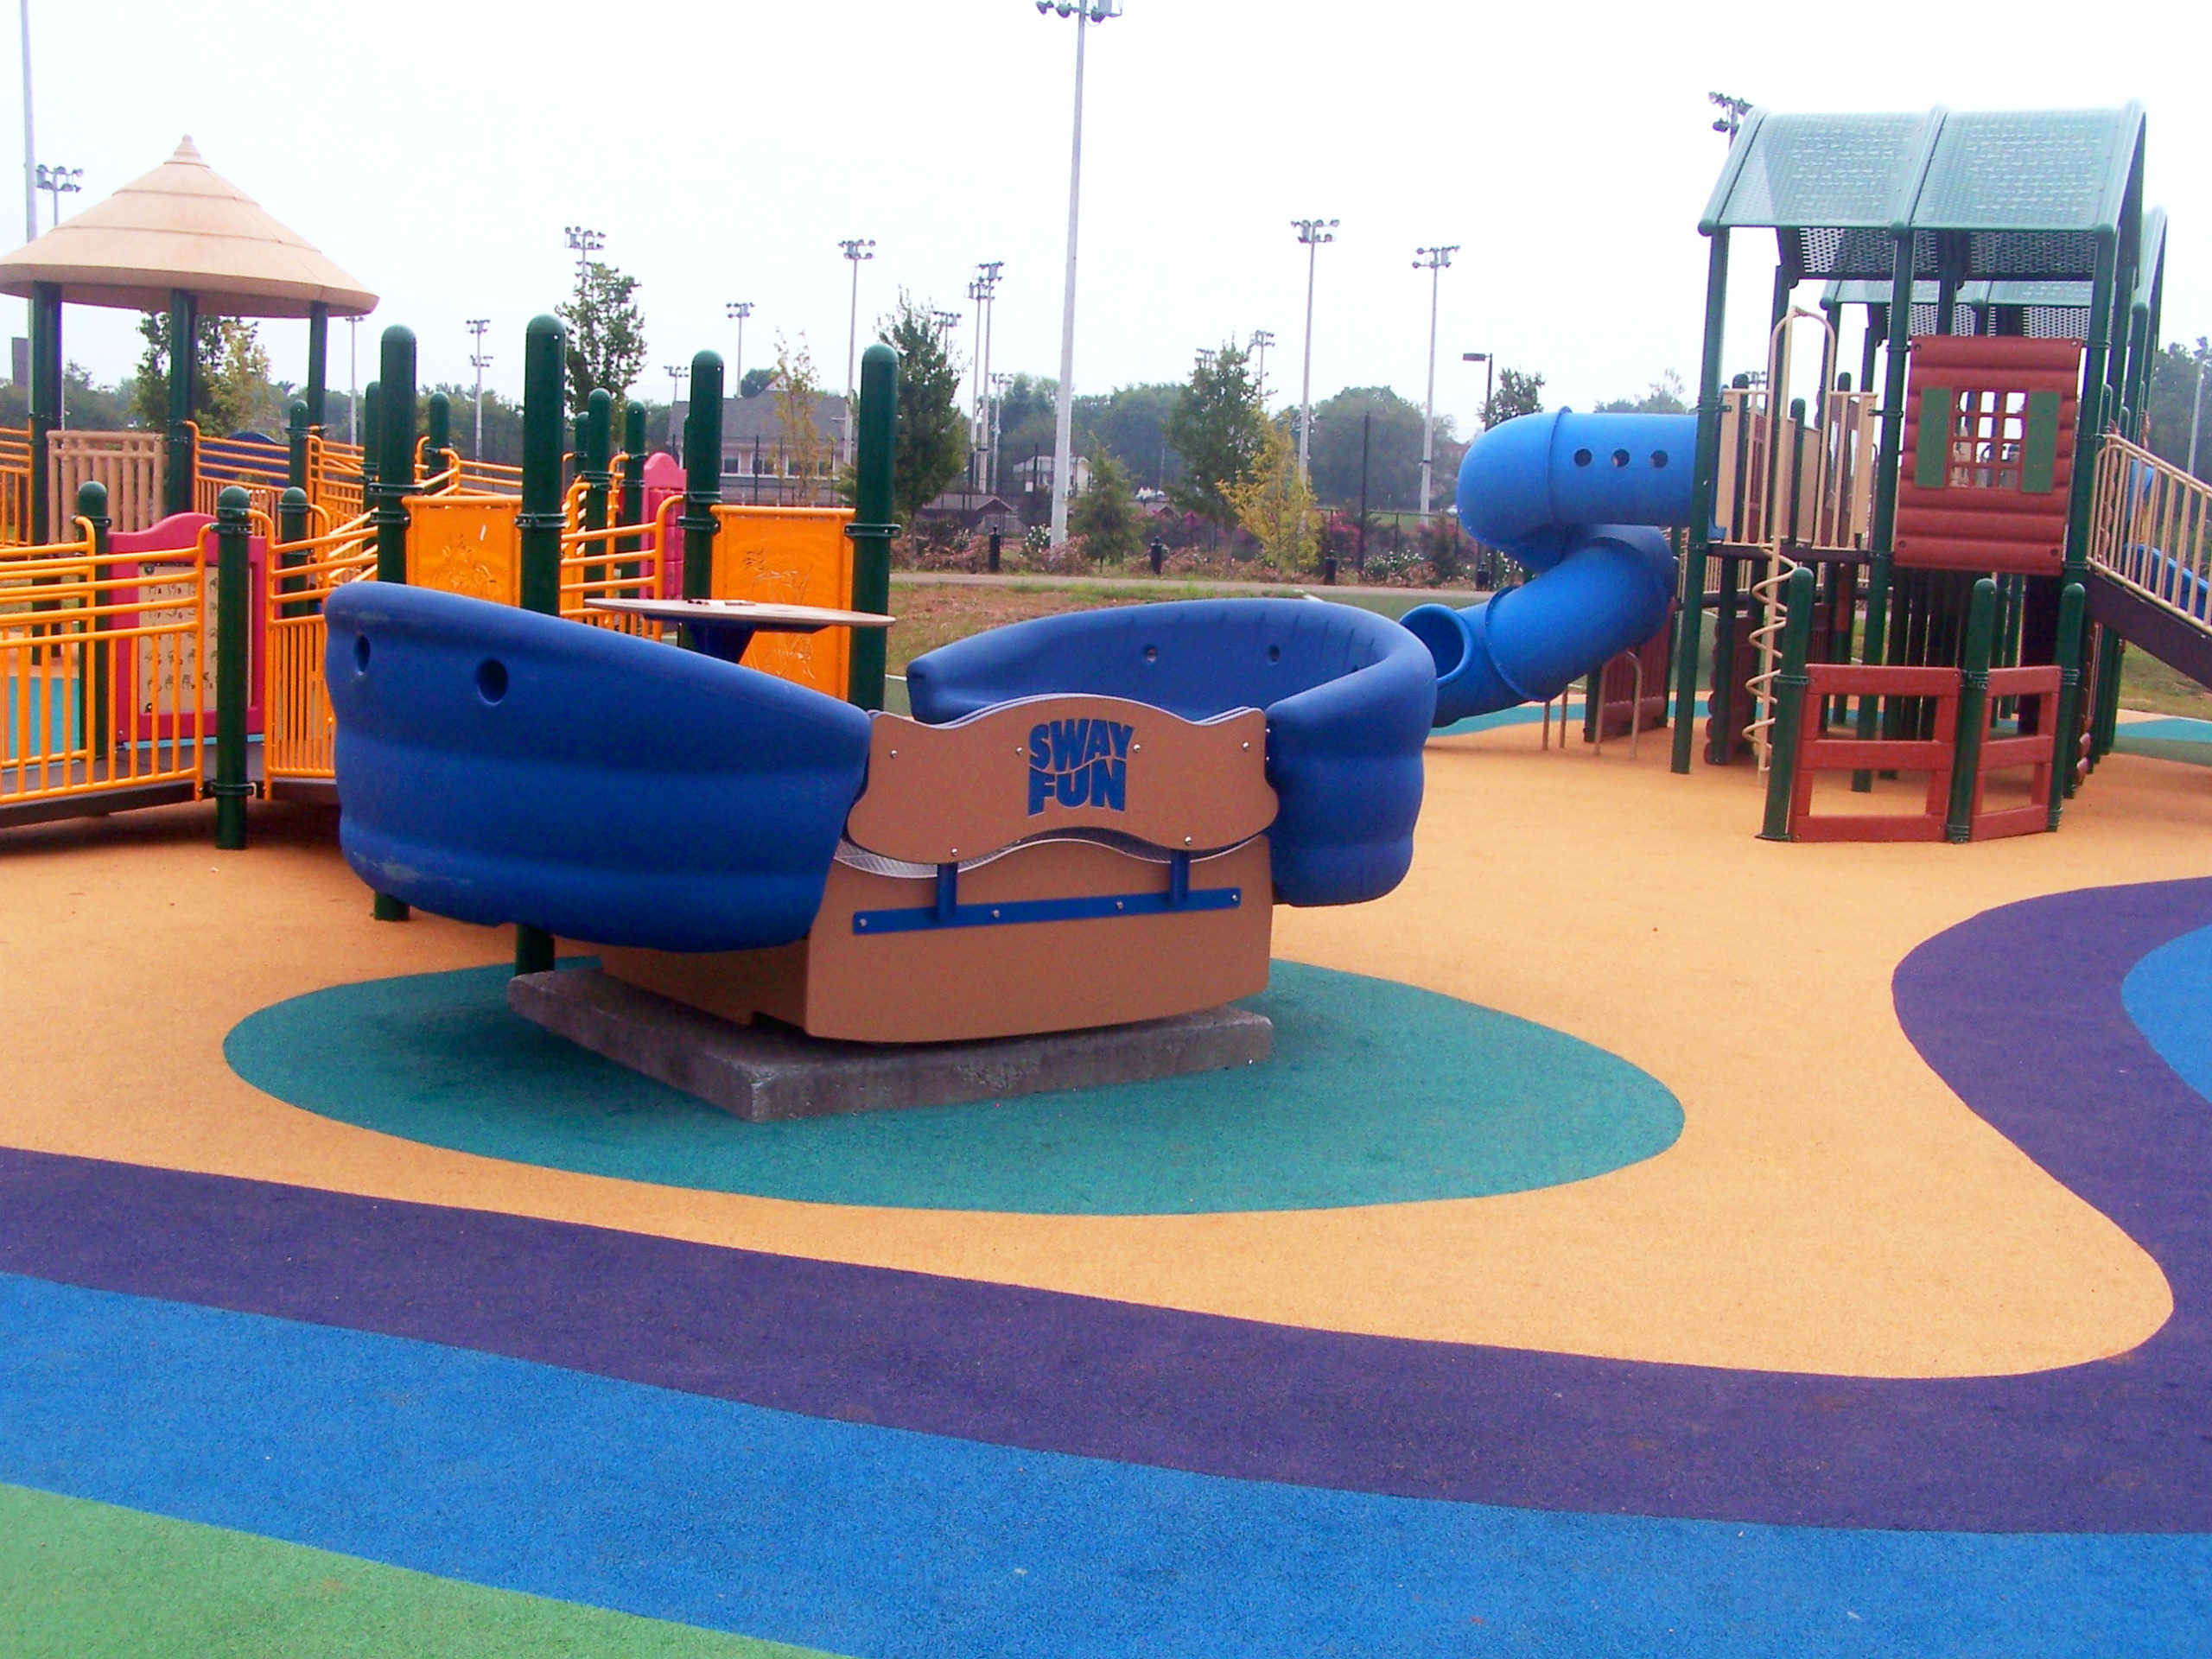 dRC designed and built the Ashley Nicole Dream Playground located at 620 Winona St Knoxville, TN 37917, which opened with a ribbon cutting ceremony in 2005. This accessible playground was designed for all children to grow and play together in an accepting and inclusive environment where “all” kids can develop positive friendships and learn kindness toward one another.